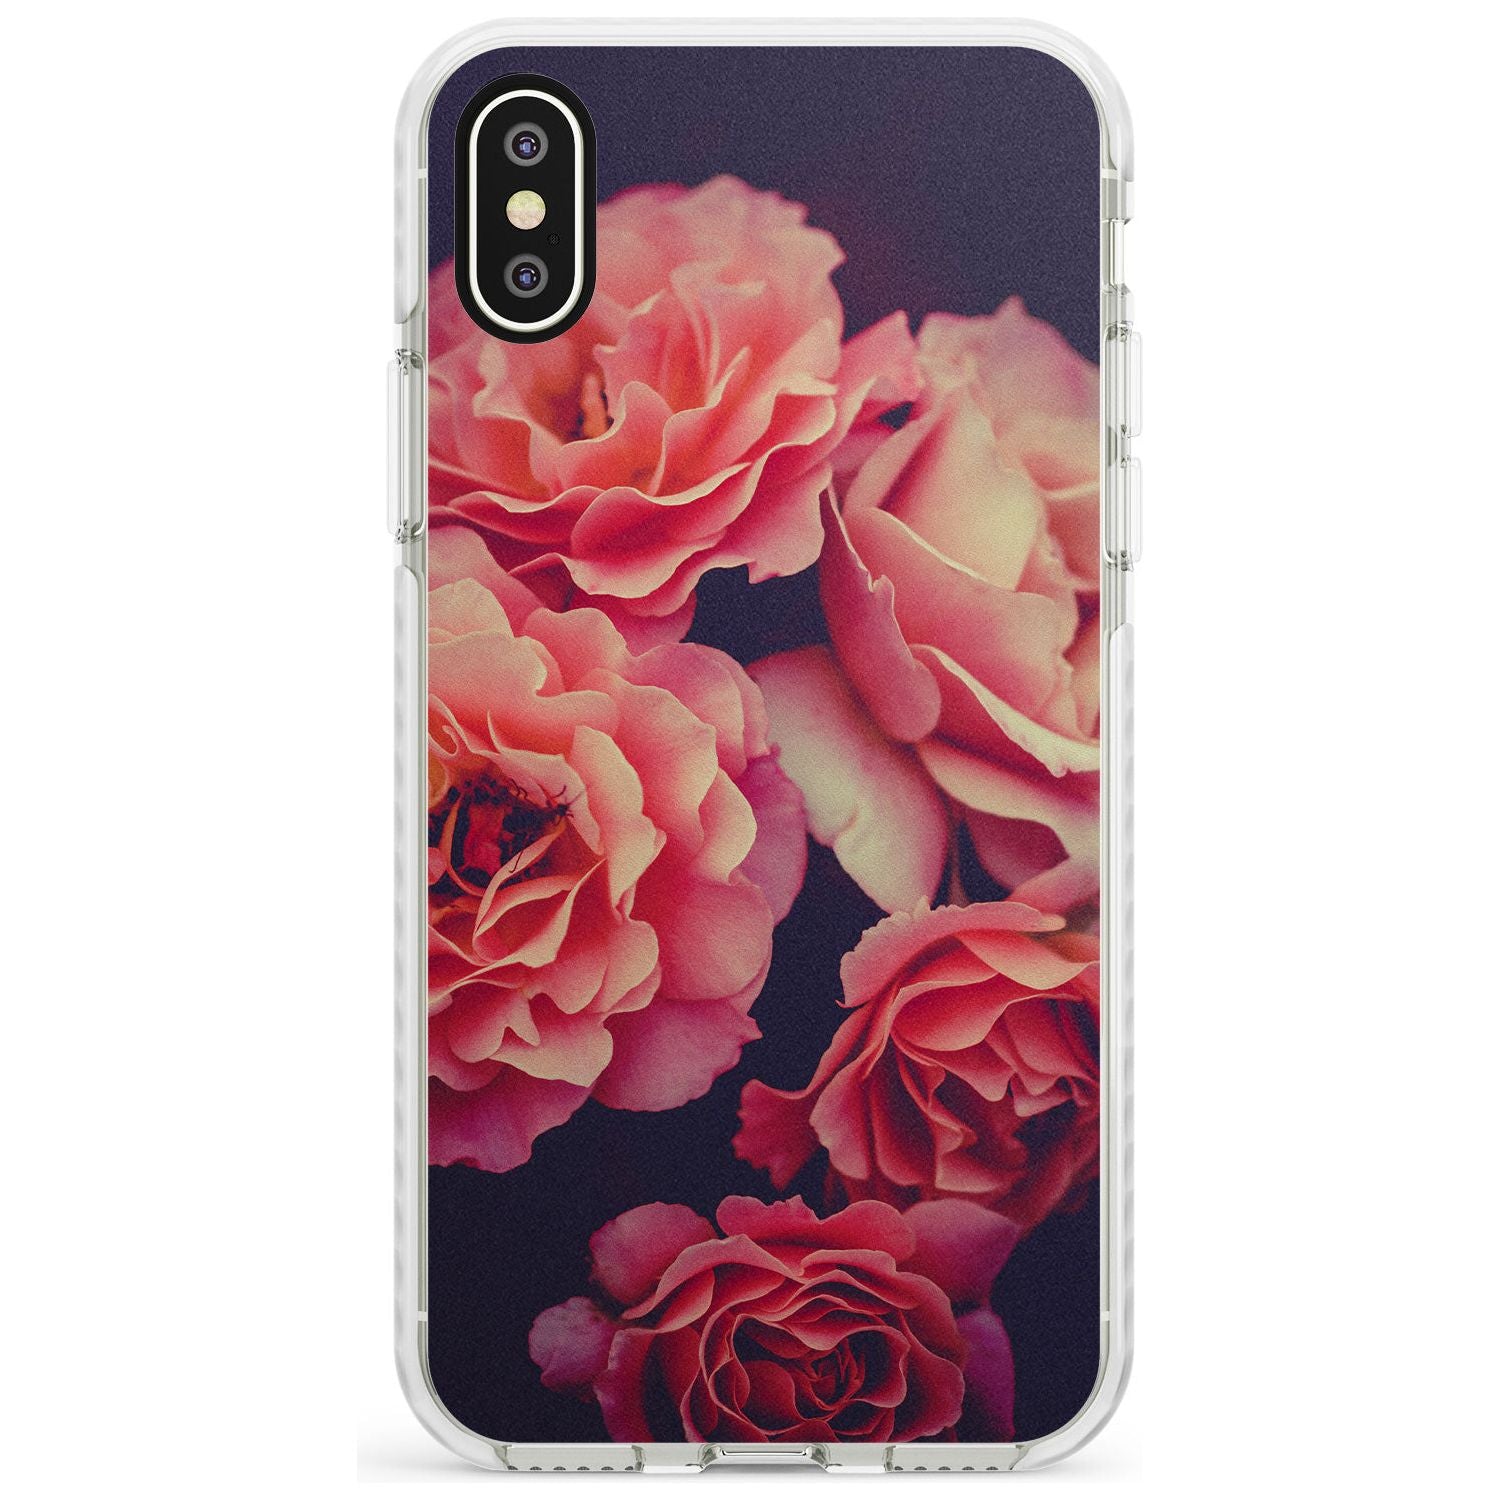 Pink Roses Photograph Impact Phone Case for iPhone X XS Max XR